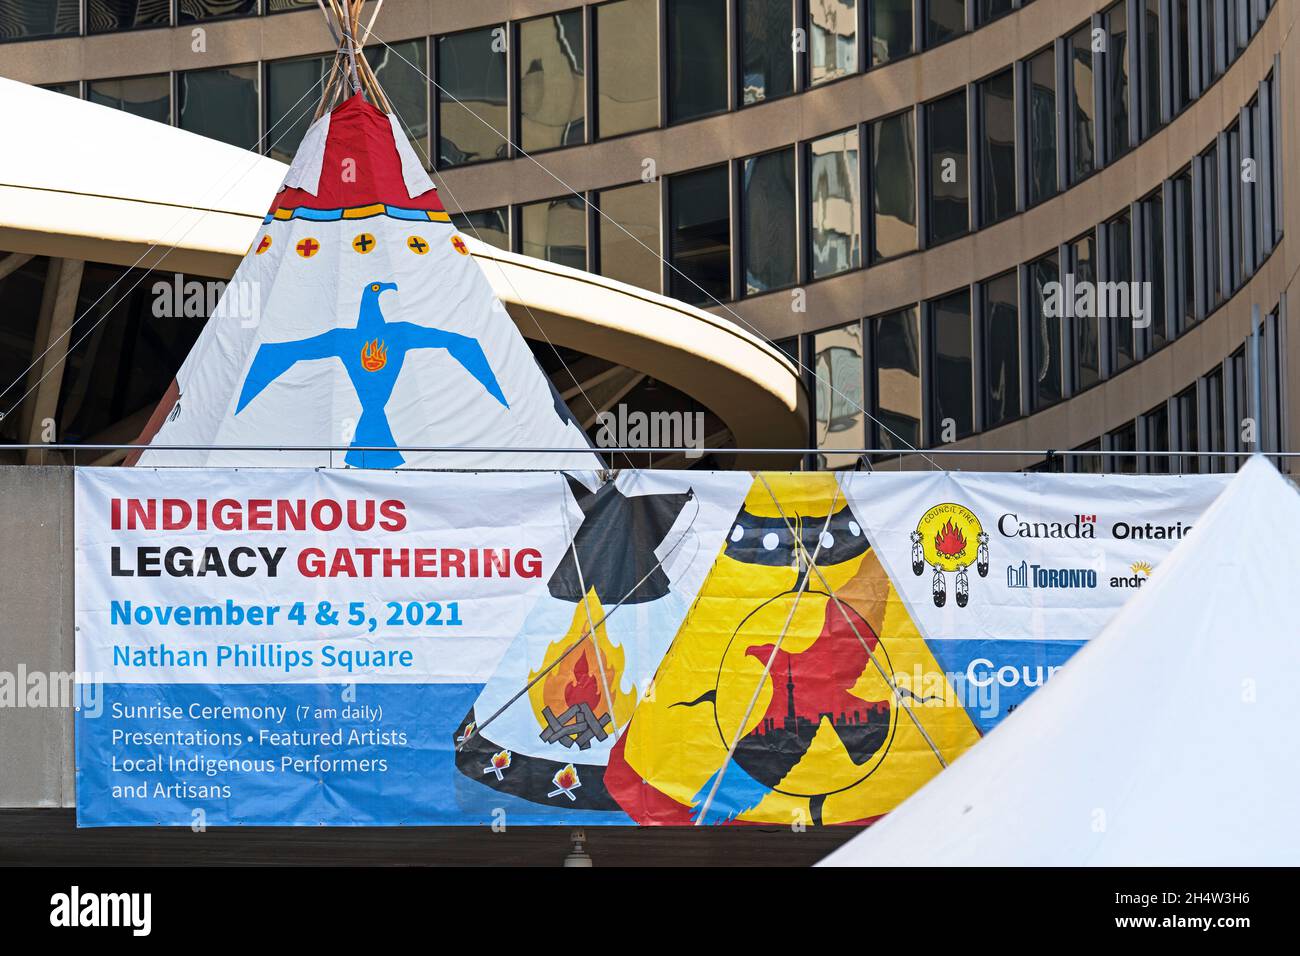 Sign, Banner, Indigenous Legacy Gathering, on November 4, 2021 in Toronto, Nathan Phillips Square, Canada Stock Photo